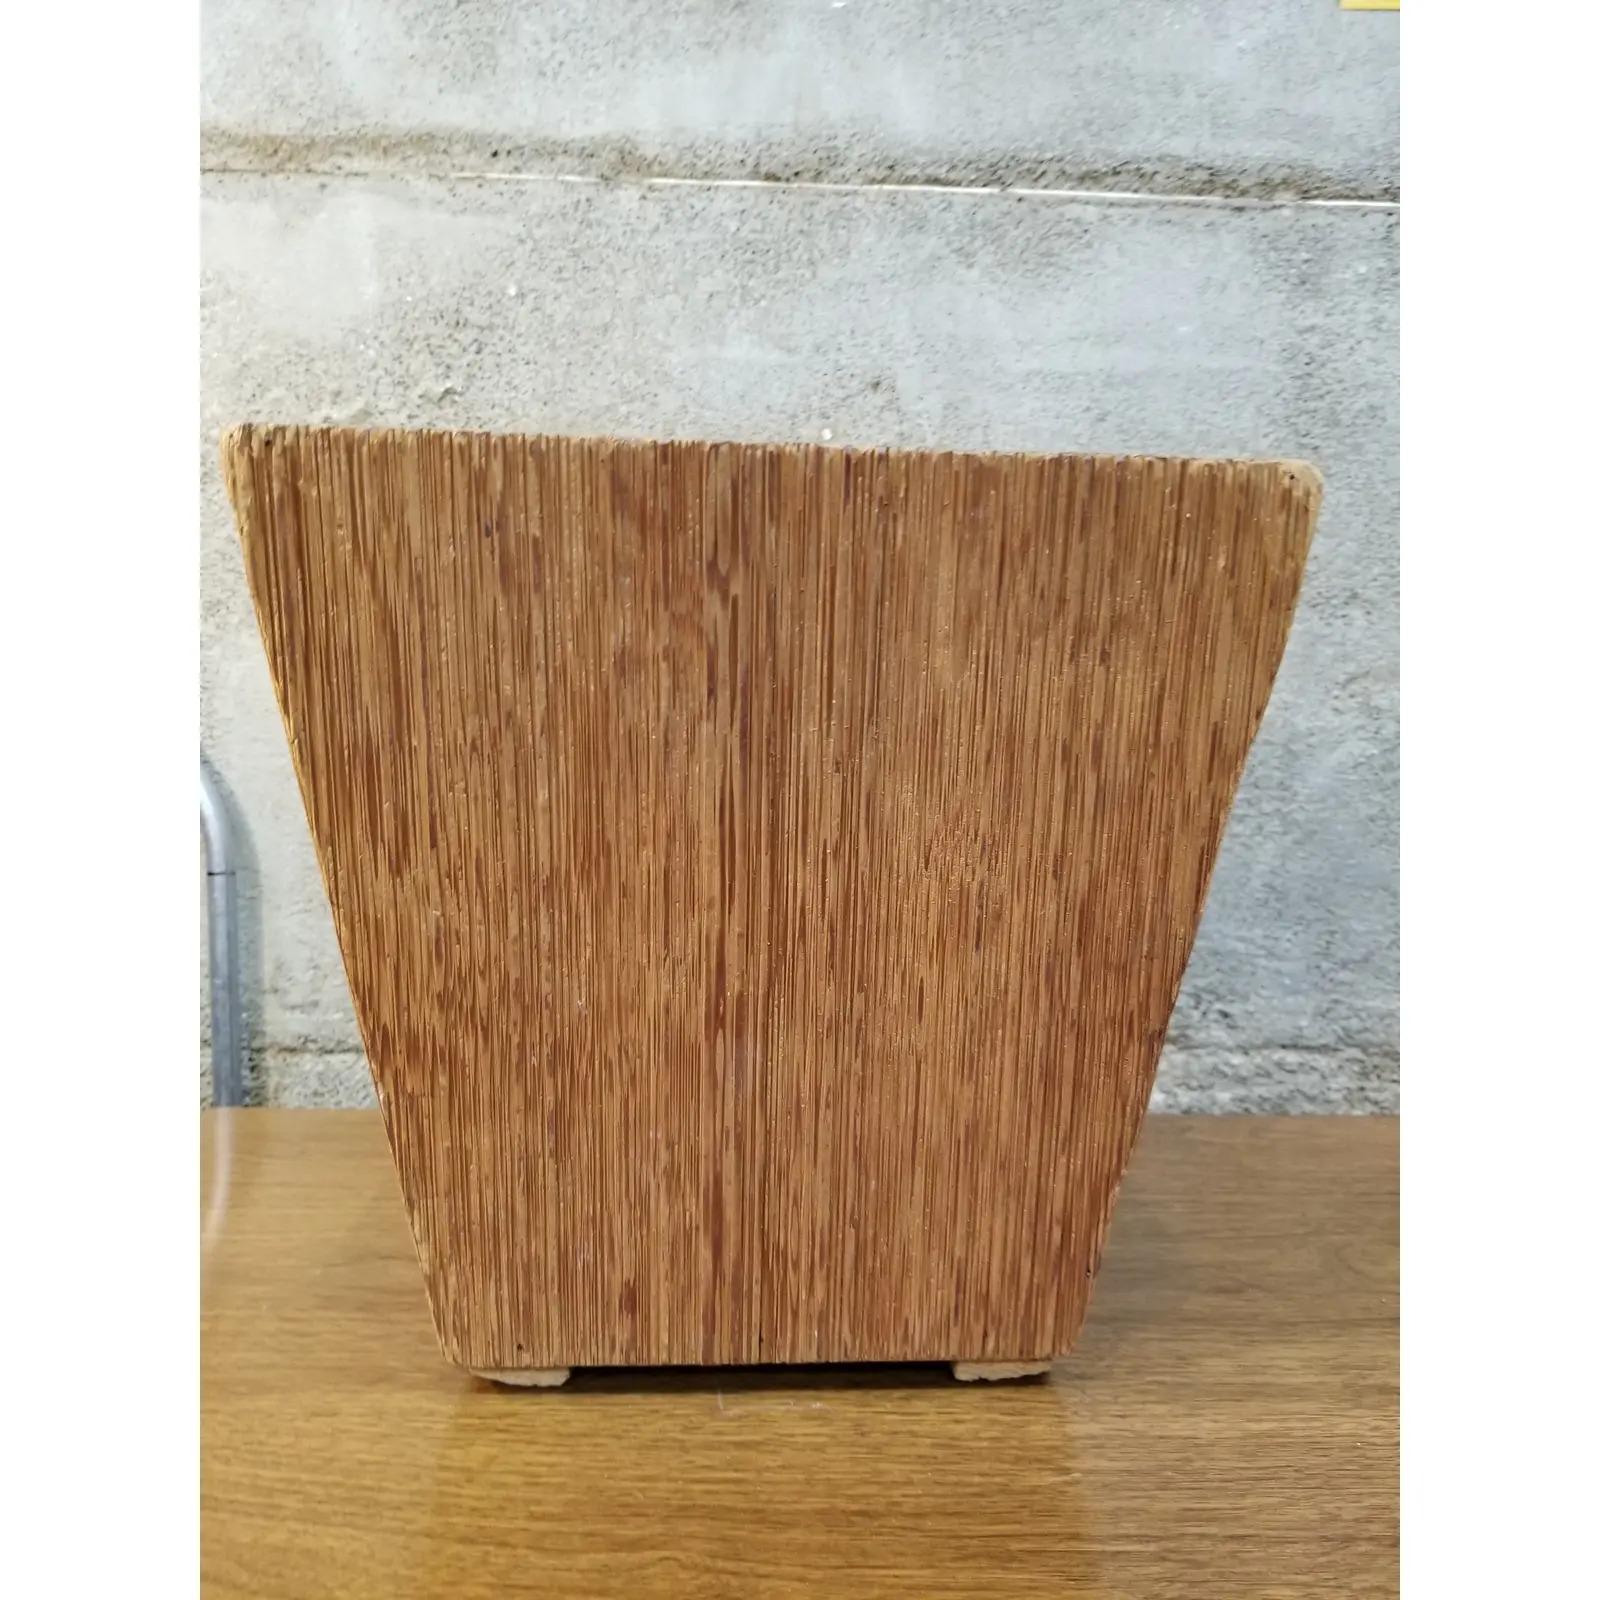 A Mid-Century Modern waste basket attributed to Paul Frankl. Made of combed fir with a conical four sided rectangular design. This item was acquired from a private estate in California, the entire home was filled with documented Paul Frankl